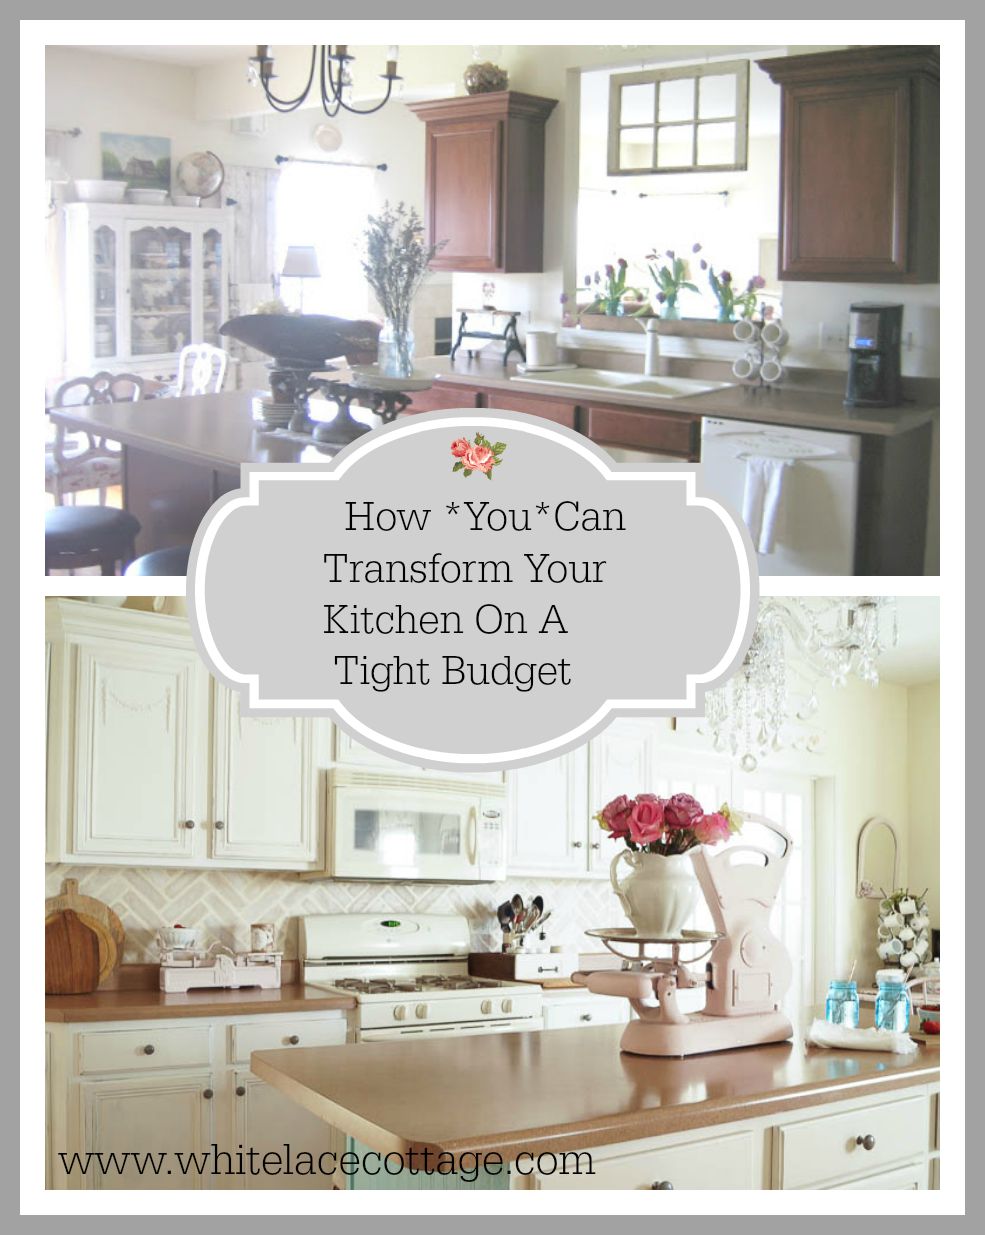 https://whitelacecottage.com/wp-content/uploads/2015/09/How-you-can-transform-your-kitchen-on-a-tight-budget.-Sharing-tips-and-tricks-on-how-to-create-a-beautiful-shabby-farmhouse-kitchen-on-a-tight-budget.-www.whitelacecottage.com_.jpg